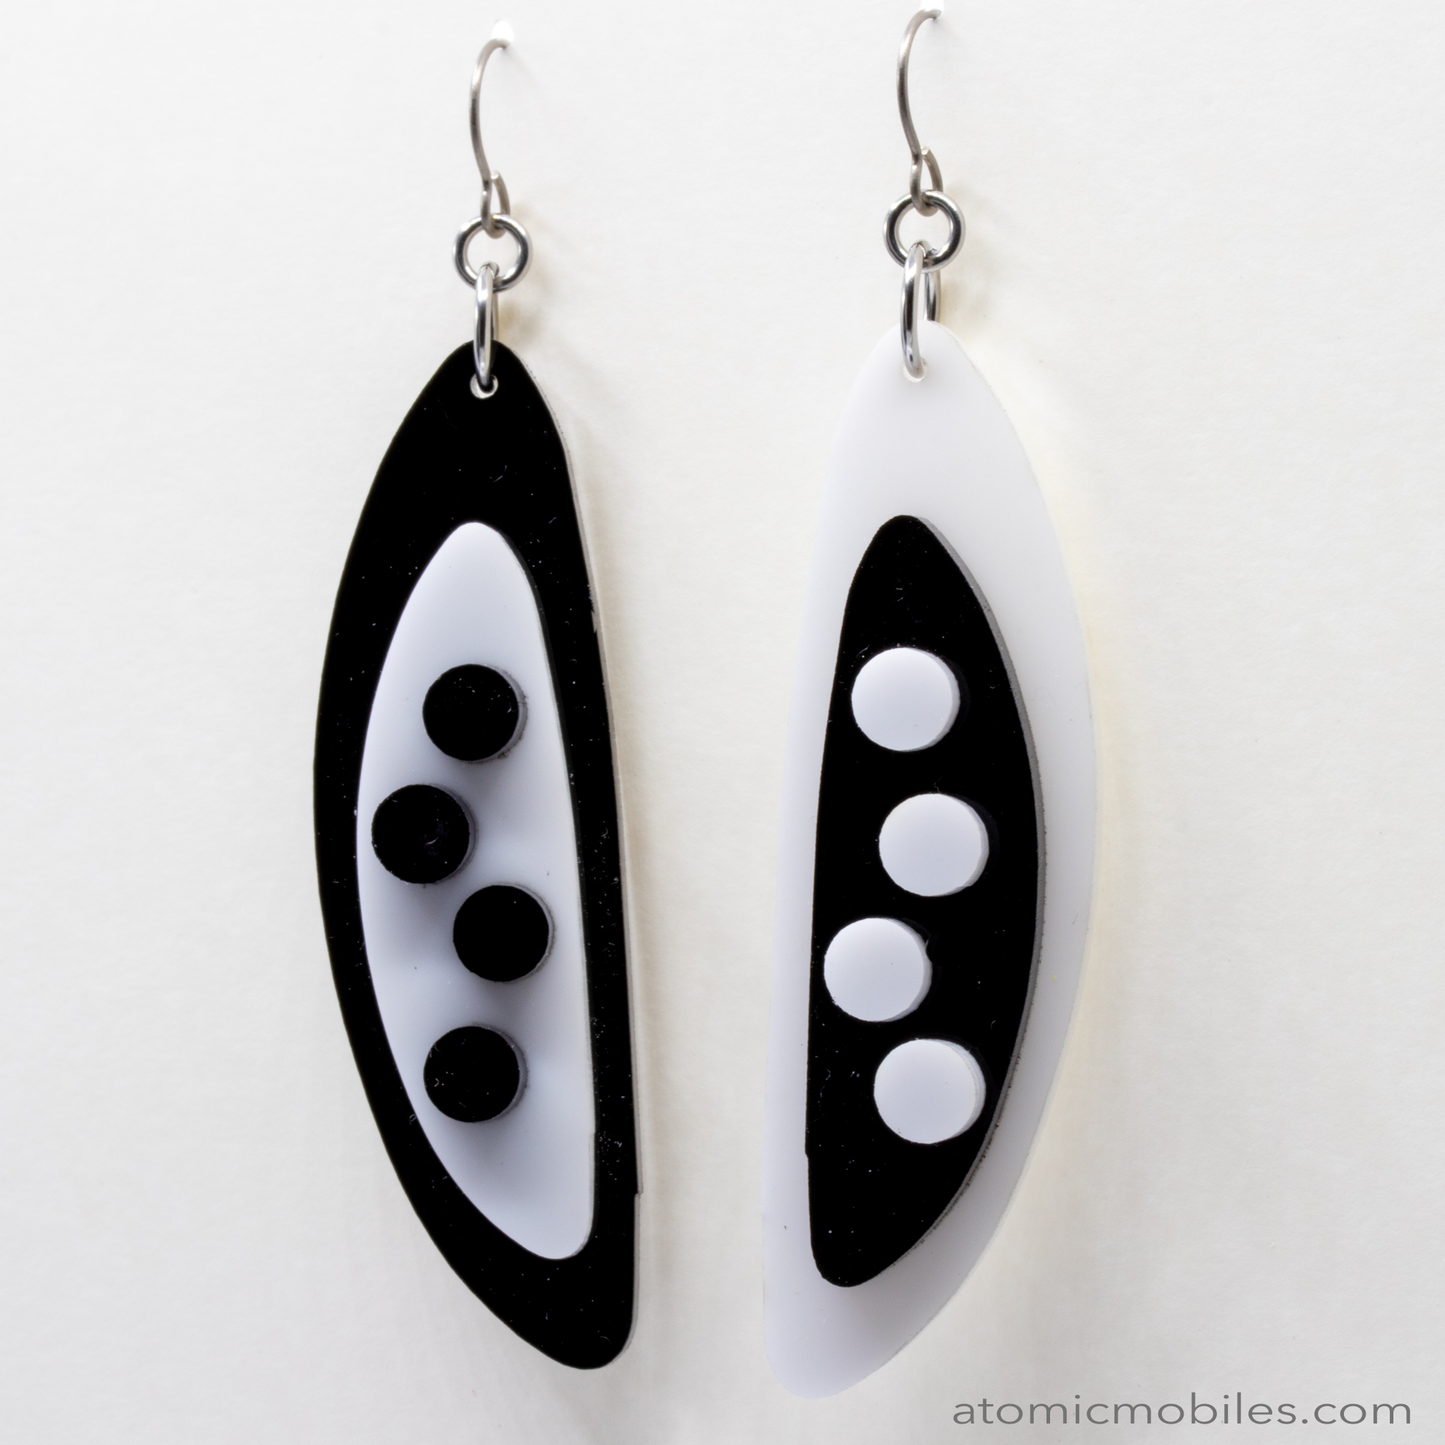 POPdots modern retro statement earrings in Black and White by AtomicMobiles.com